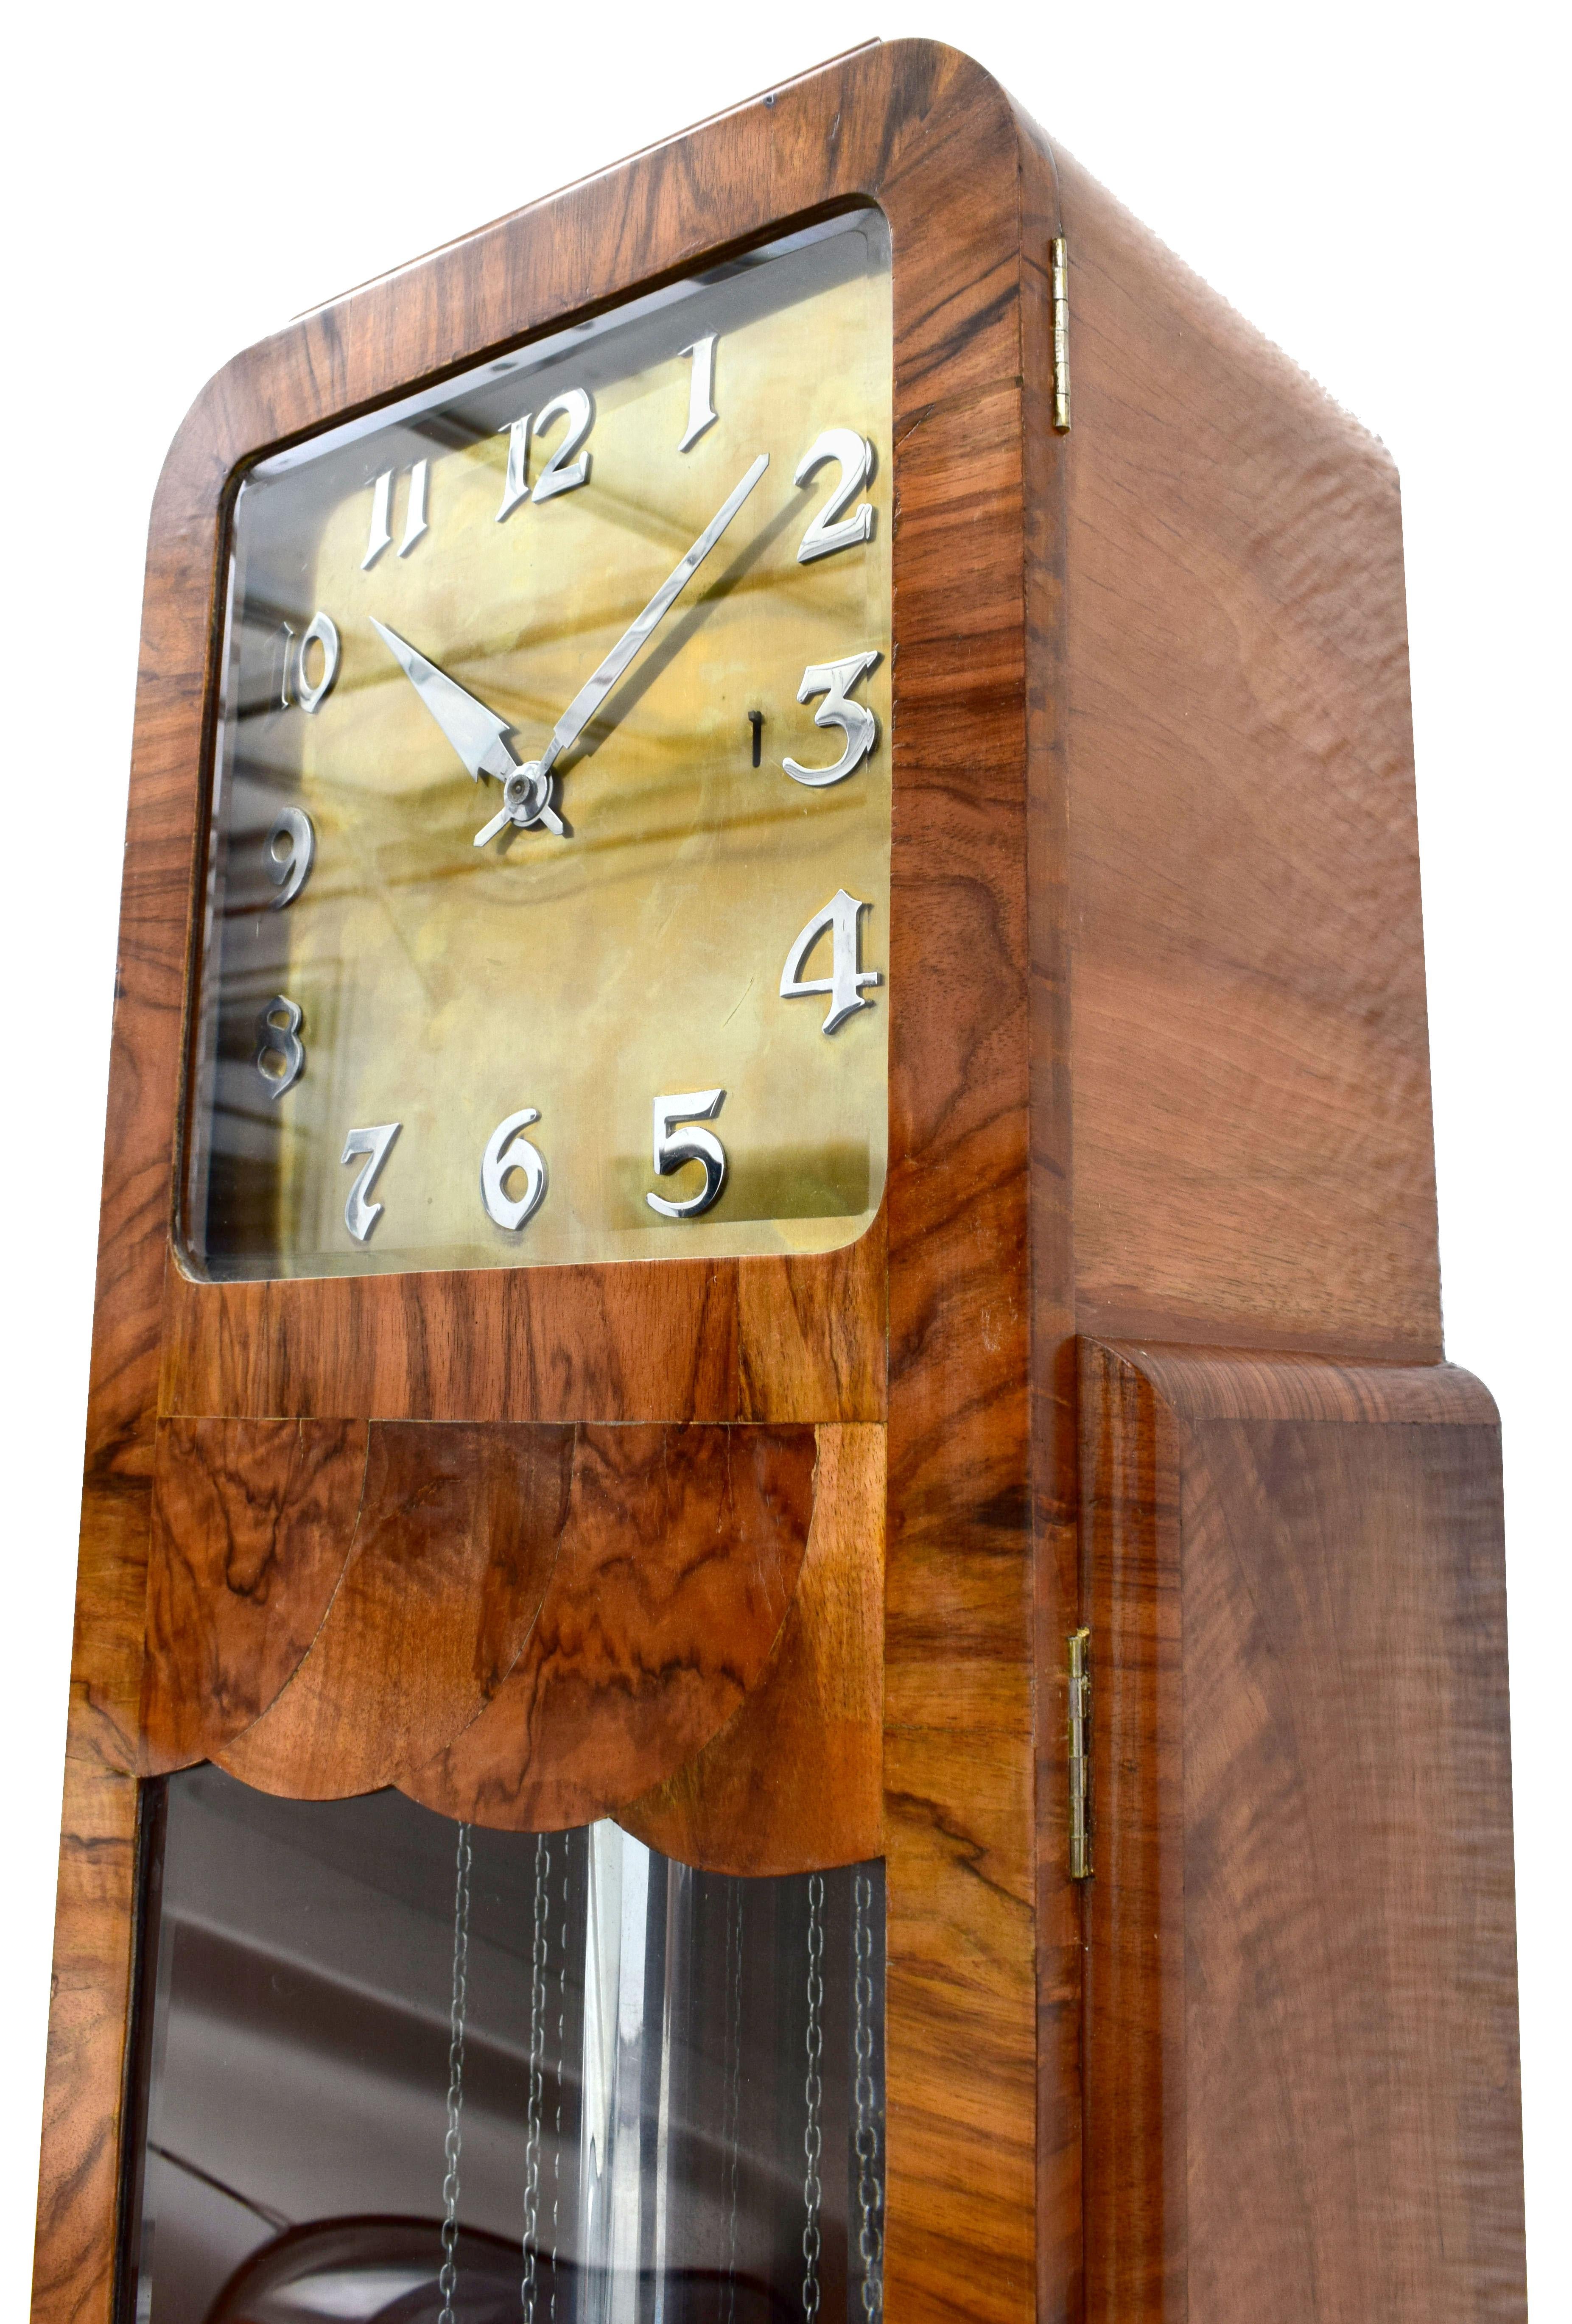 Magnificent Art Deco Grandfather clock dating to the 1930s, England. Extremely hard to source with such great styling. The craftsmanship to the case is spectacular, veneered in a mid tone walnut with beautiful detailing accentuating the shape, no